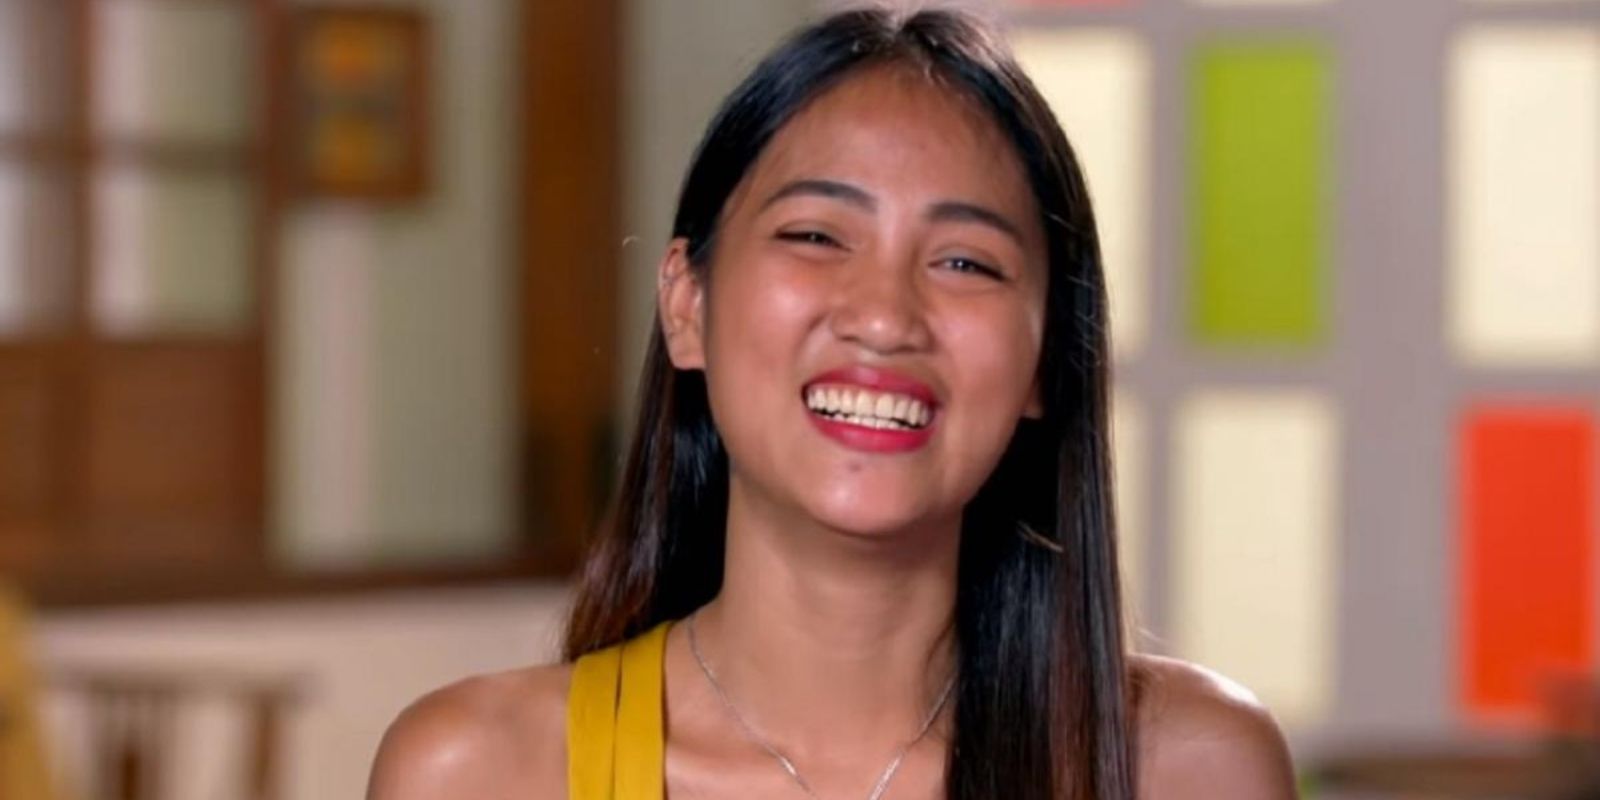 rosemary vega 90 day fiance smiling in yellow top